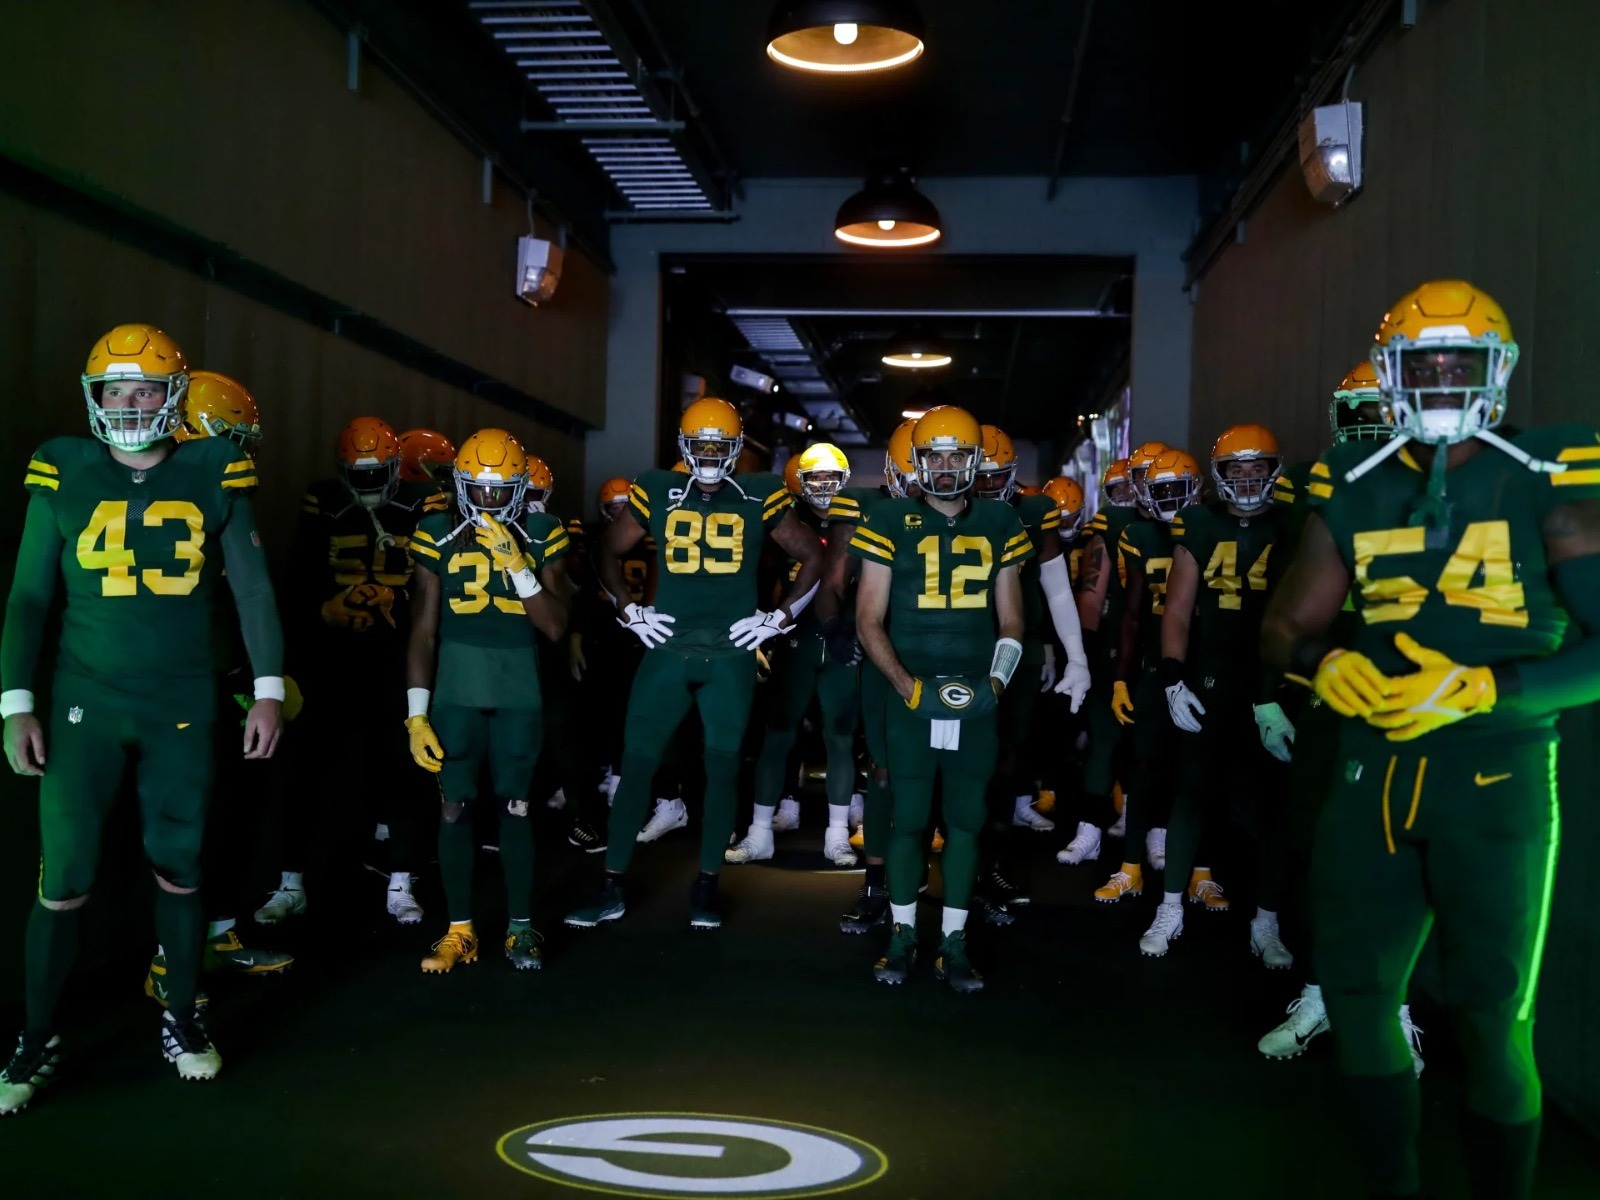 Packers 2021 alternate jerseys made for some great photos